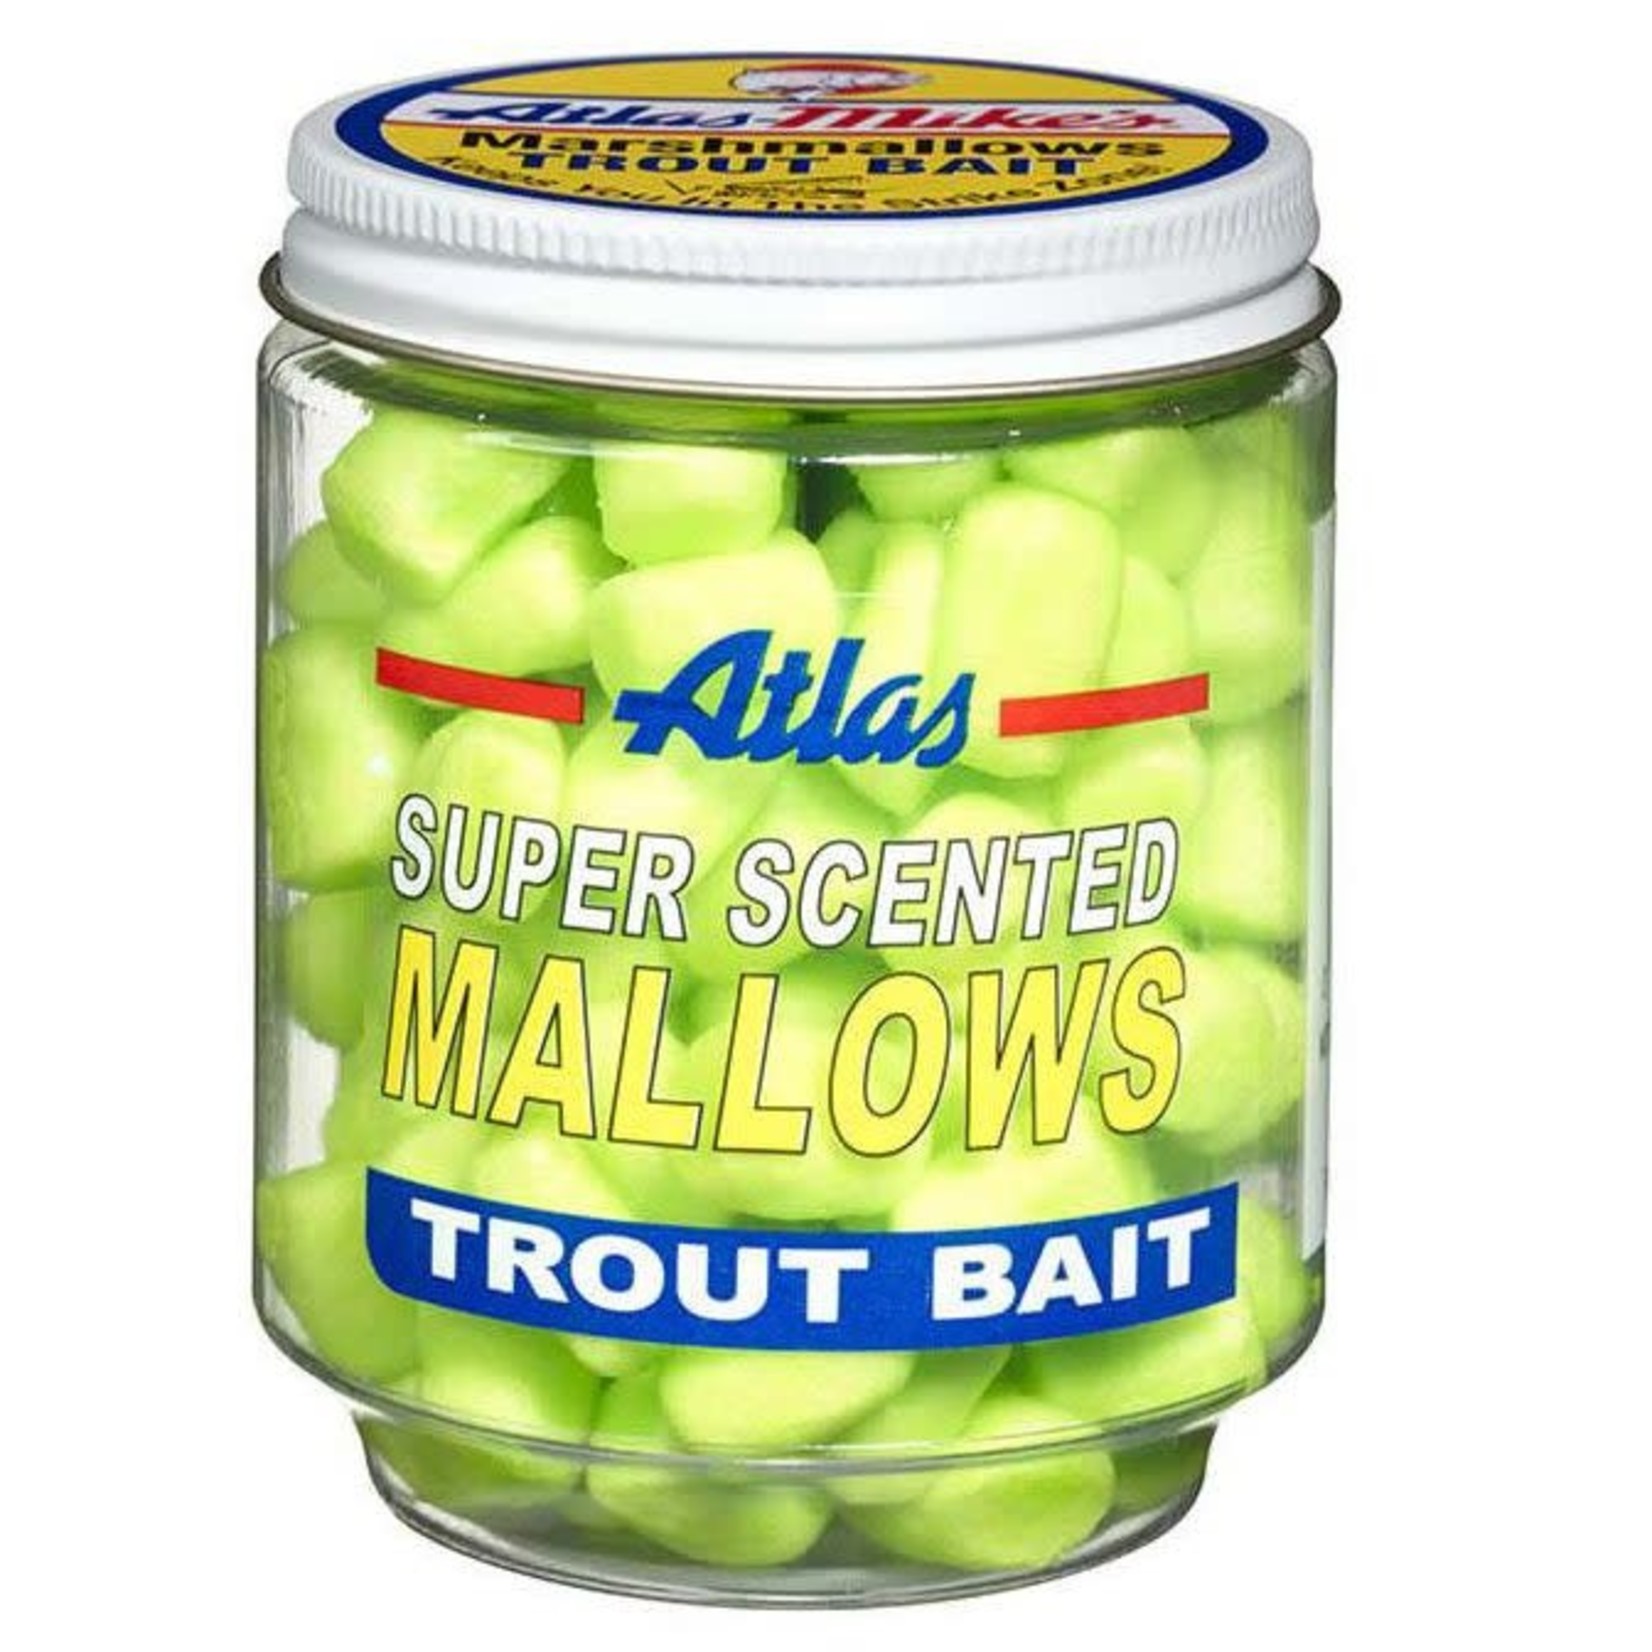 Atlas-Mike's Atlas-Mike's Super Scented Mallows